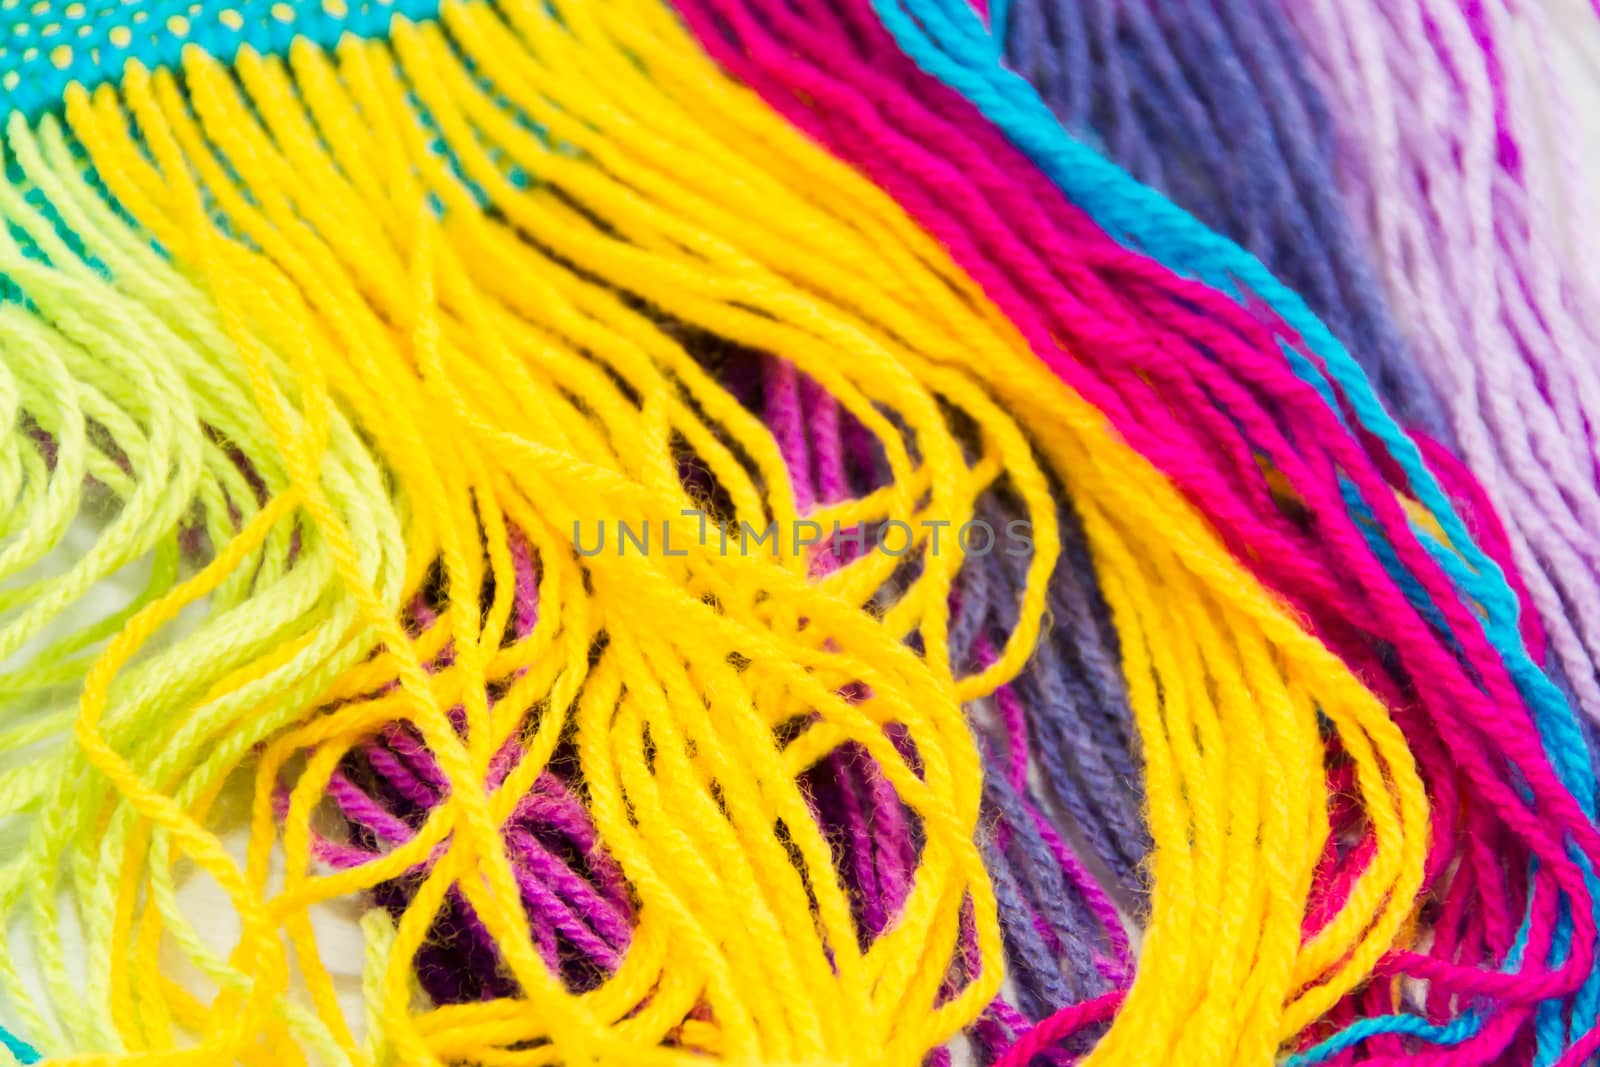 textured background of colorful woolen threads